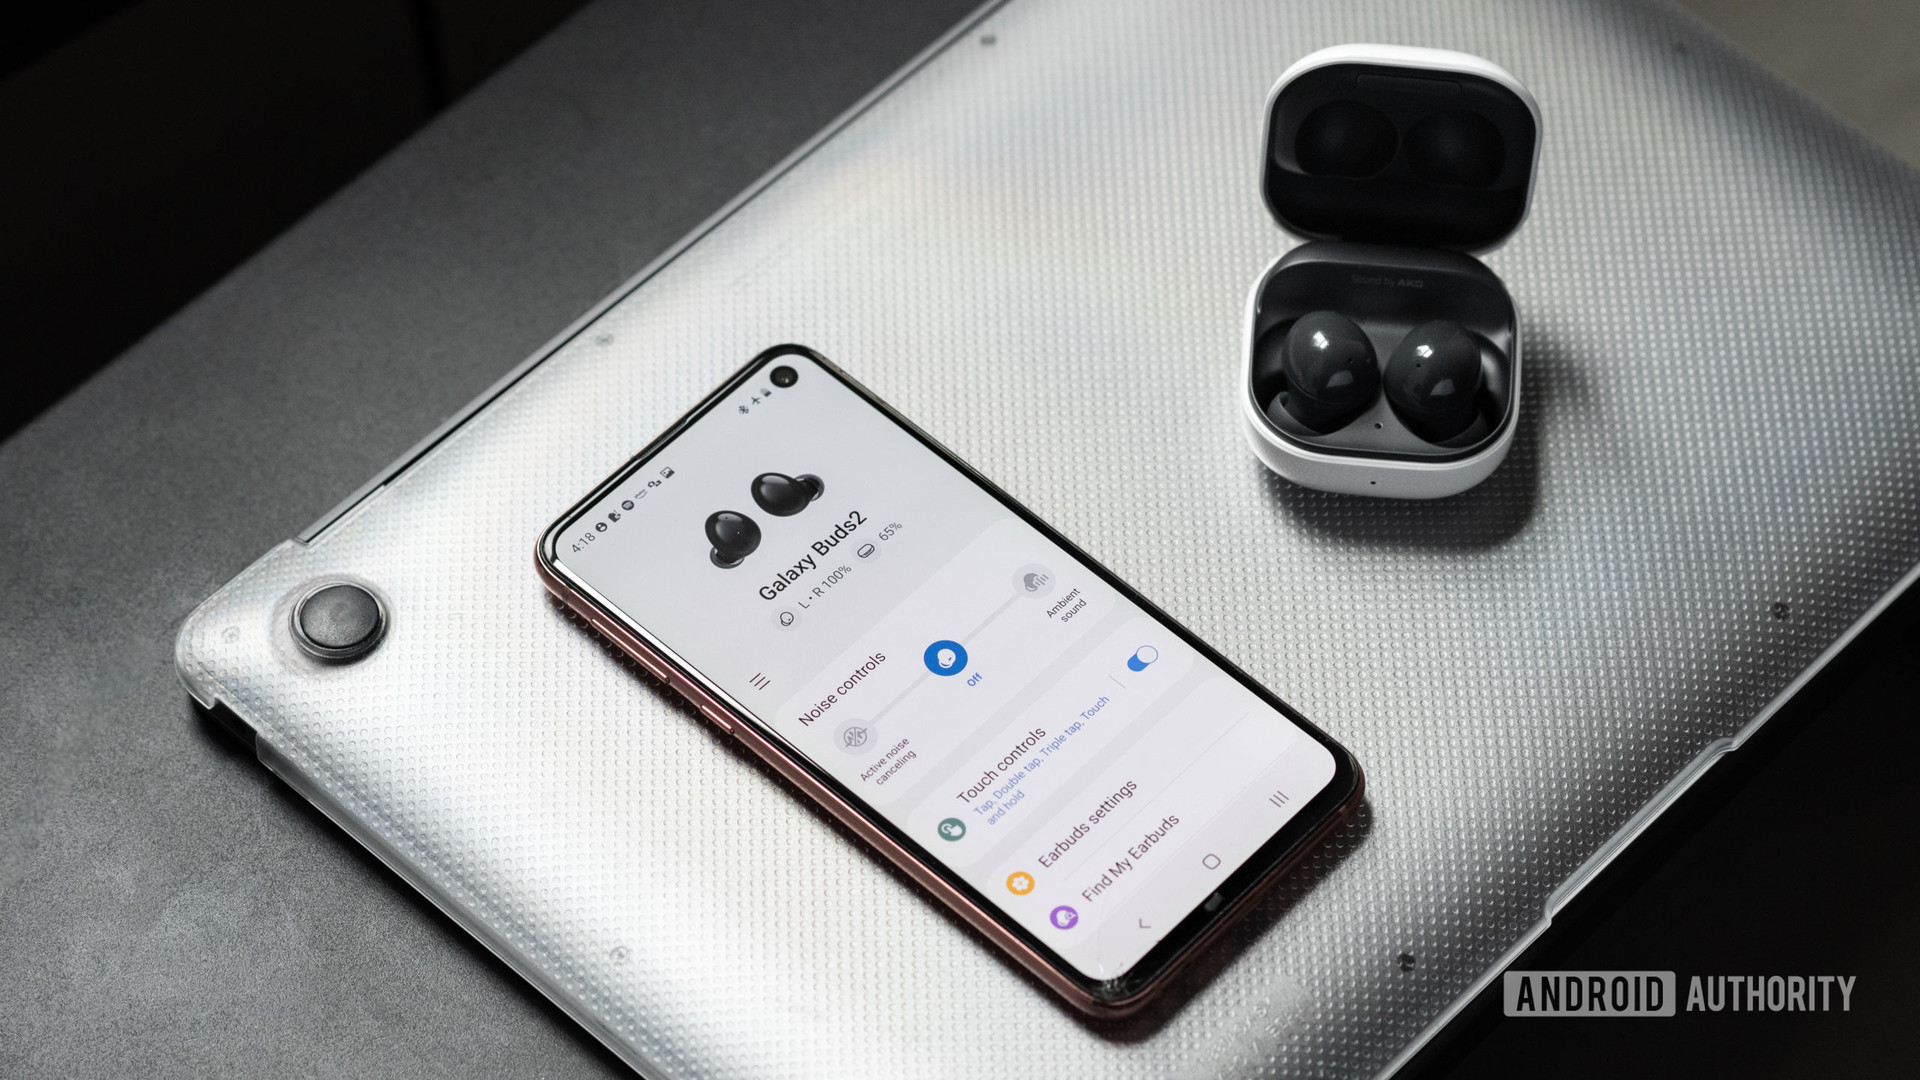 The Samsung Galaxy Buds 2 noise cancelling true wireless earbuds in the open charging case while connected to the Galaxy Wearable app on a Samsung Galaxy S10e.